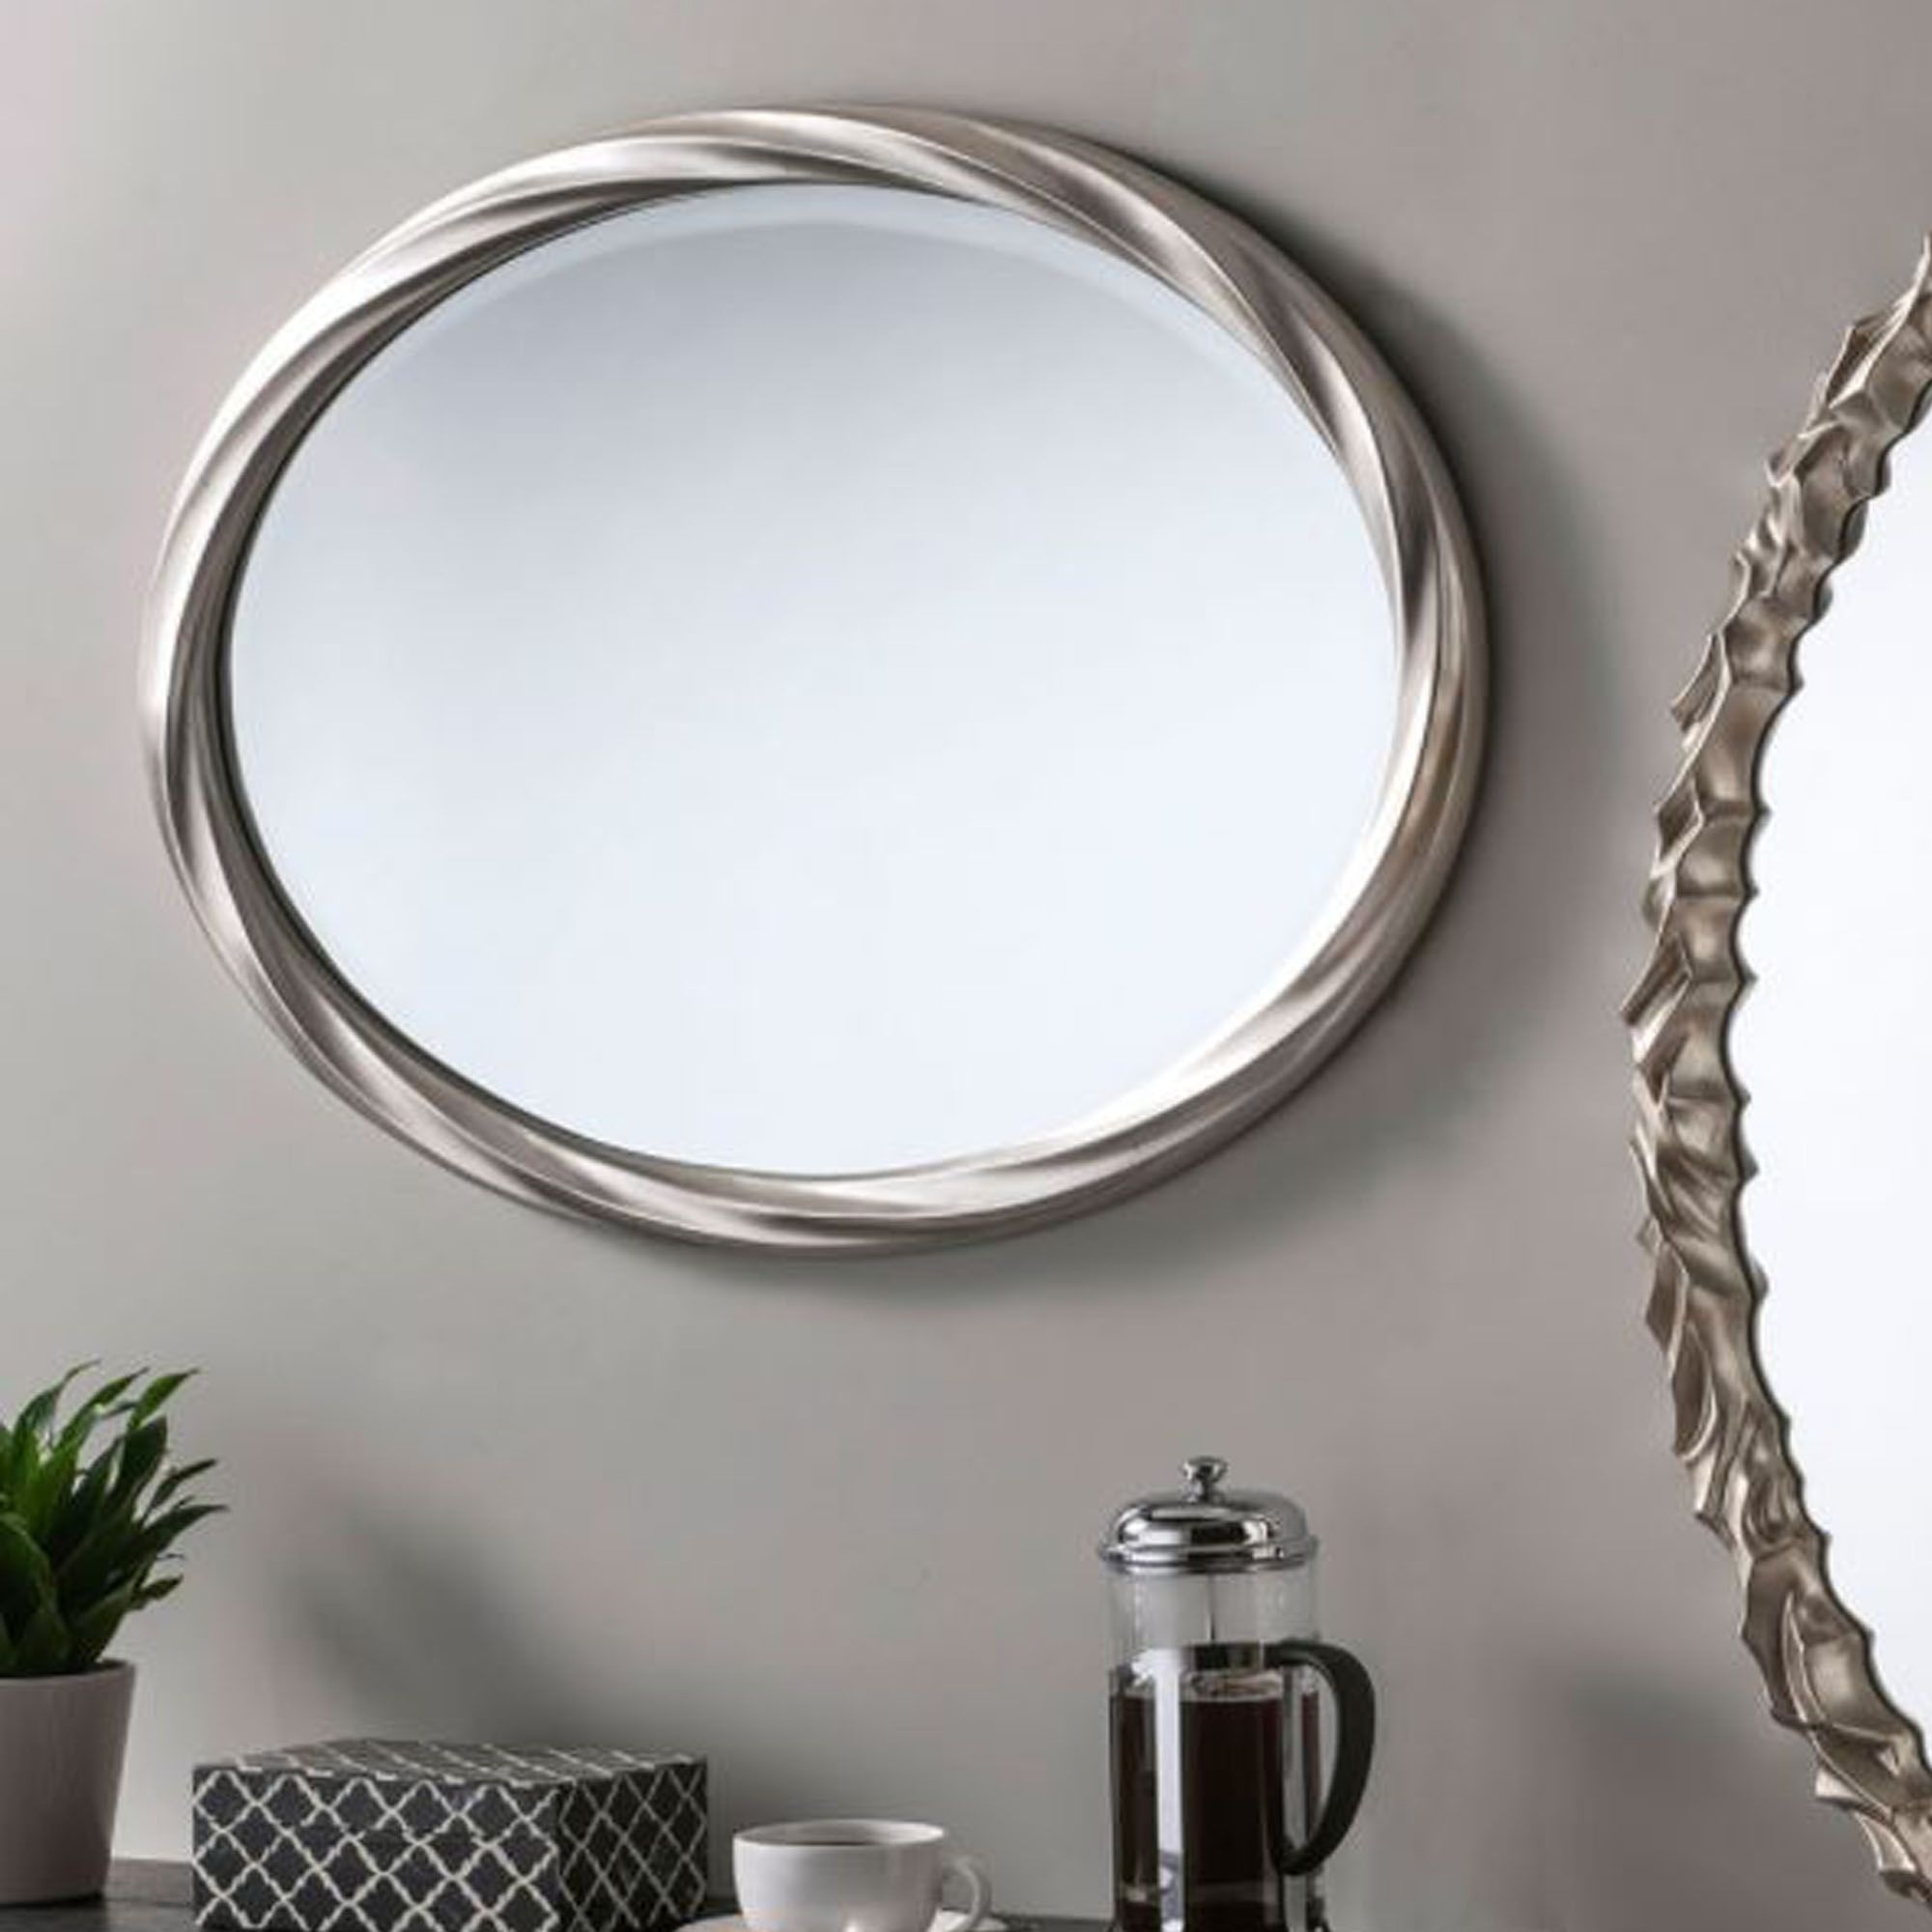 Swirl Silver Oval Wall Mirror | Contemporary Mirror | Homesdirect365 With Regard To Oval Metallic Accent Mirrors (View 14 of 15)